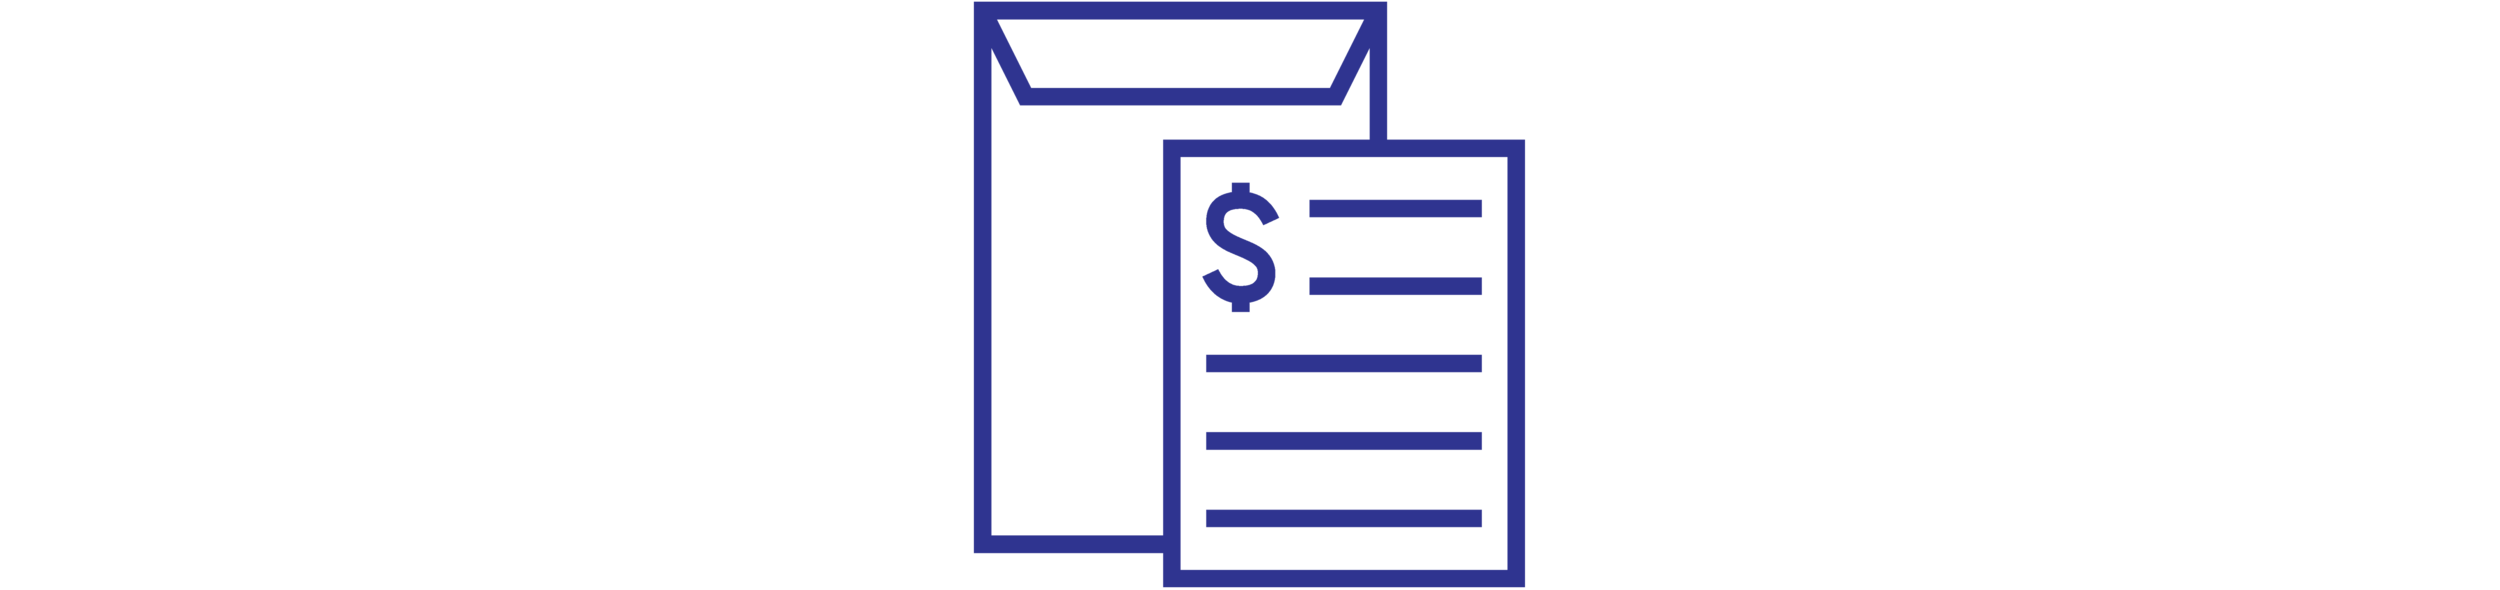 HPHA-category-icons-financial-assistance.png